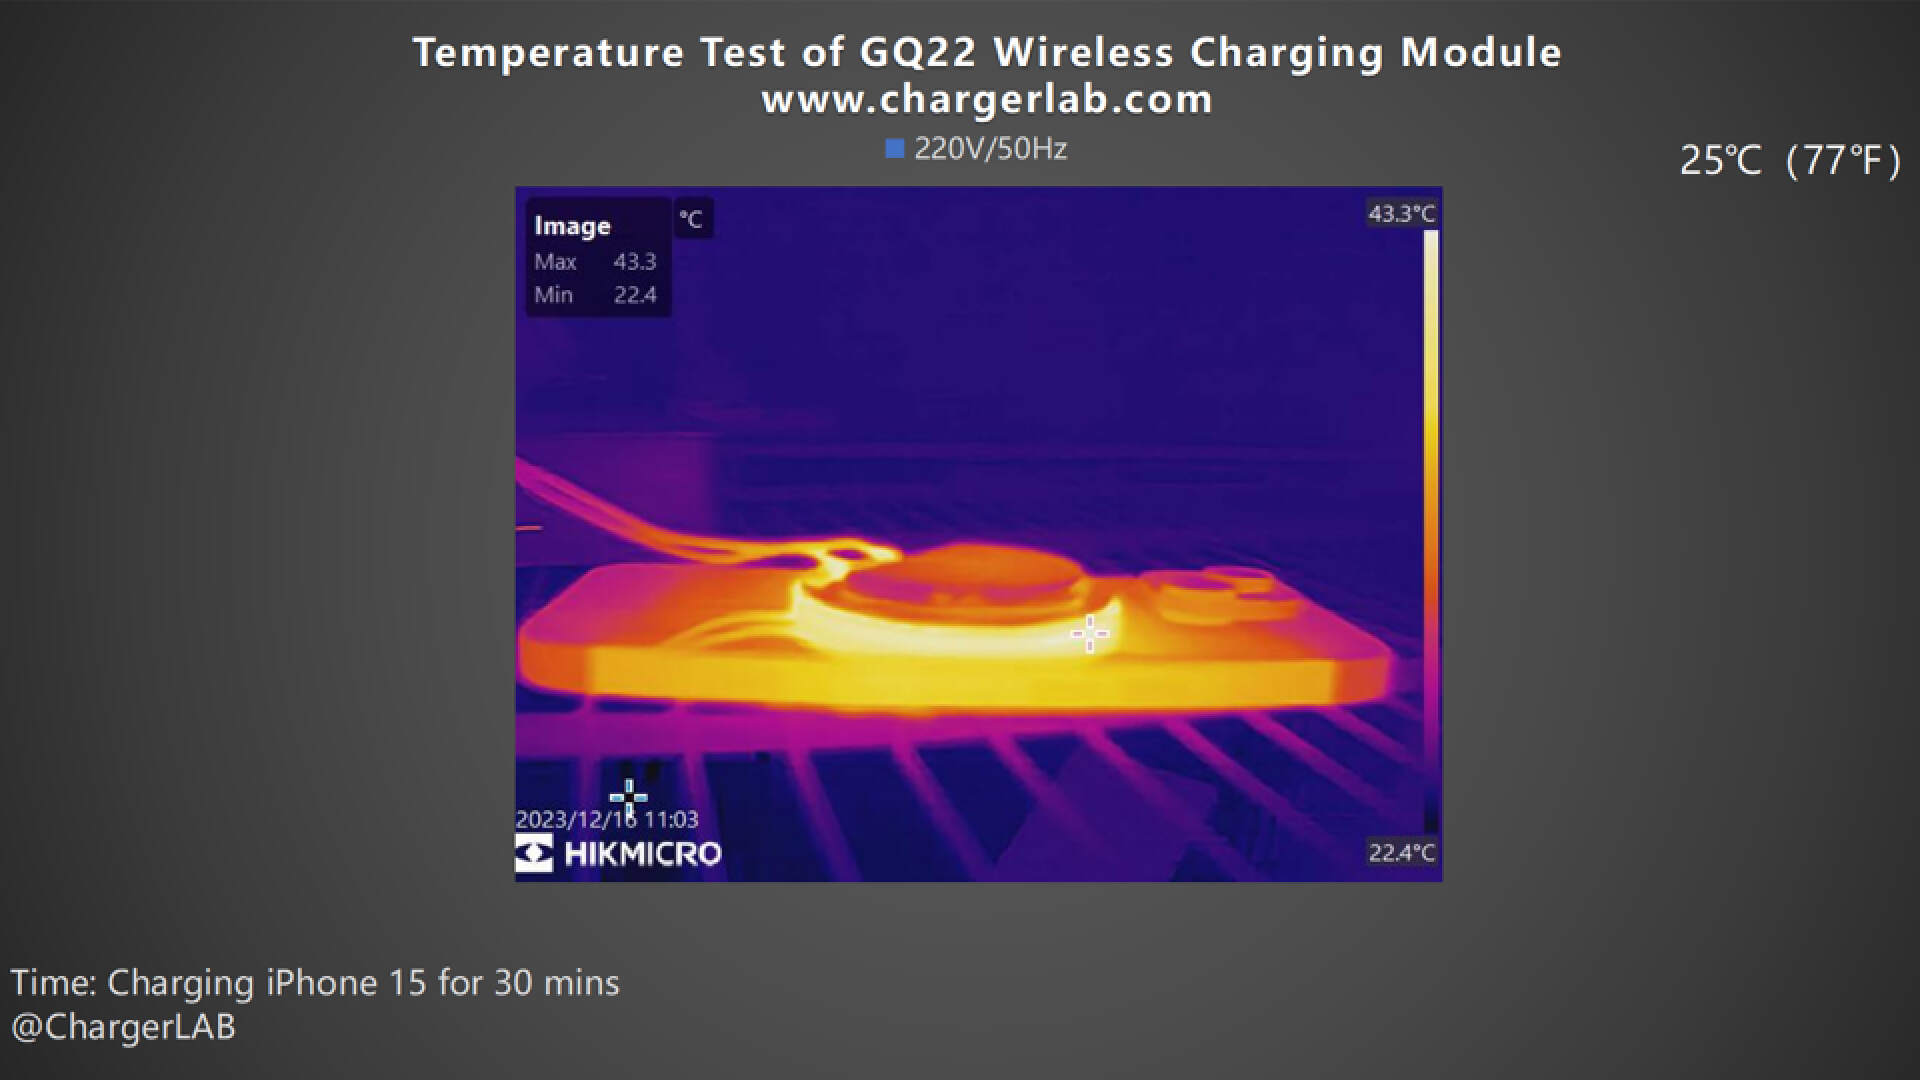 Qi2 MPP Ready | Charging Review of Gopod Group GQ22 Wireless Charging Module-Chargerlab